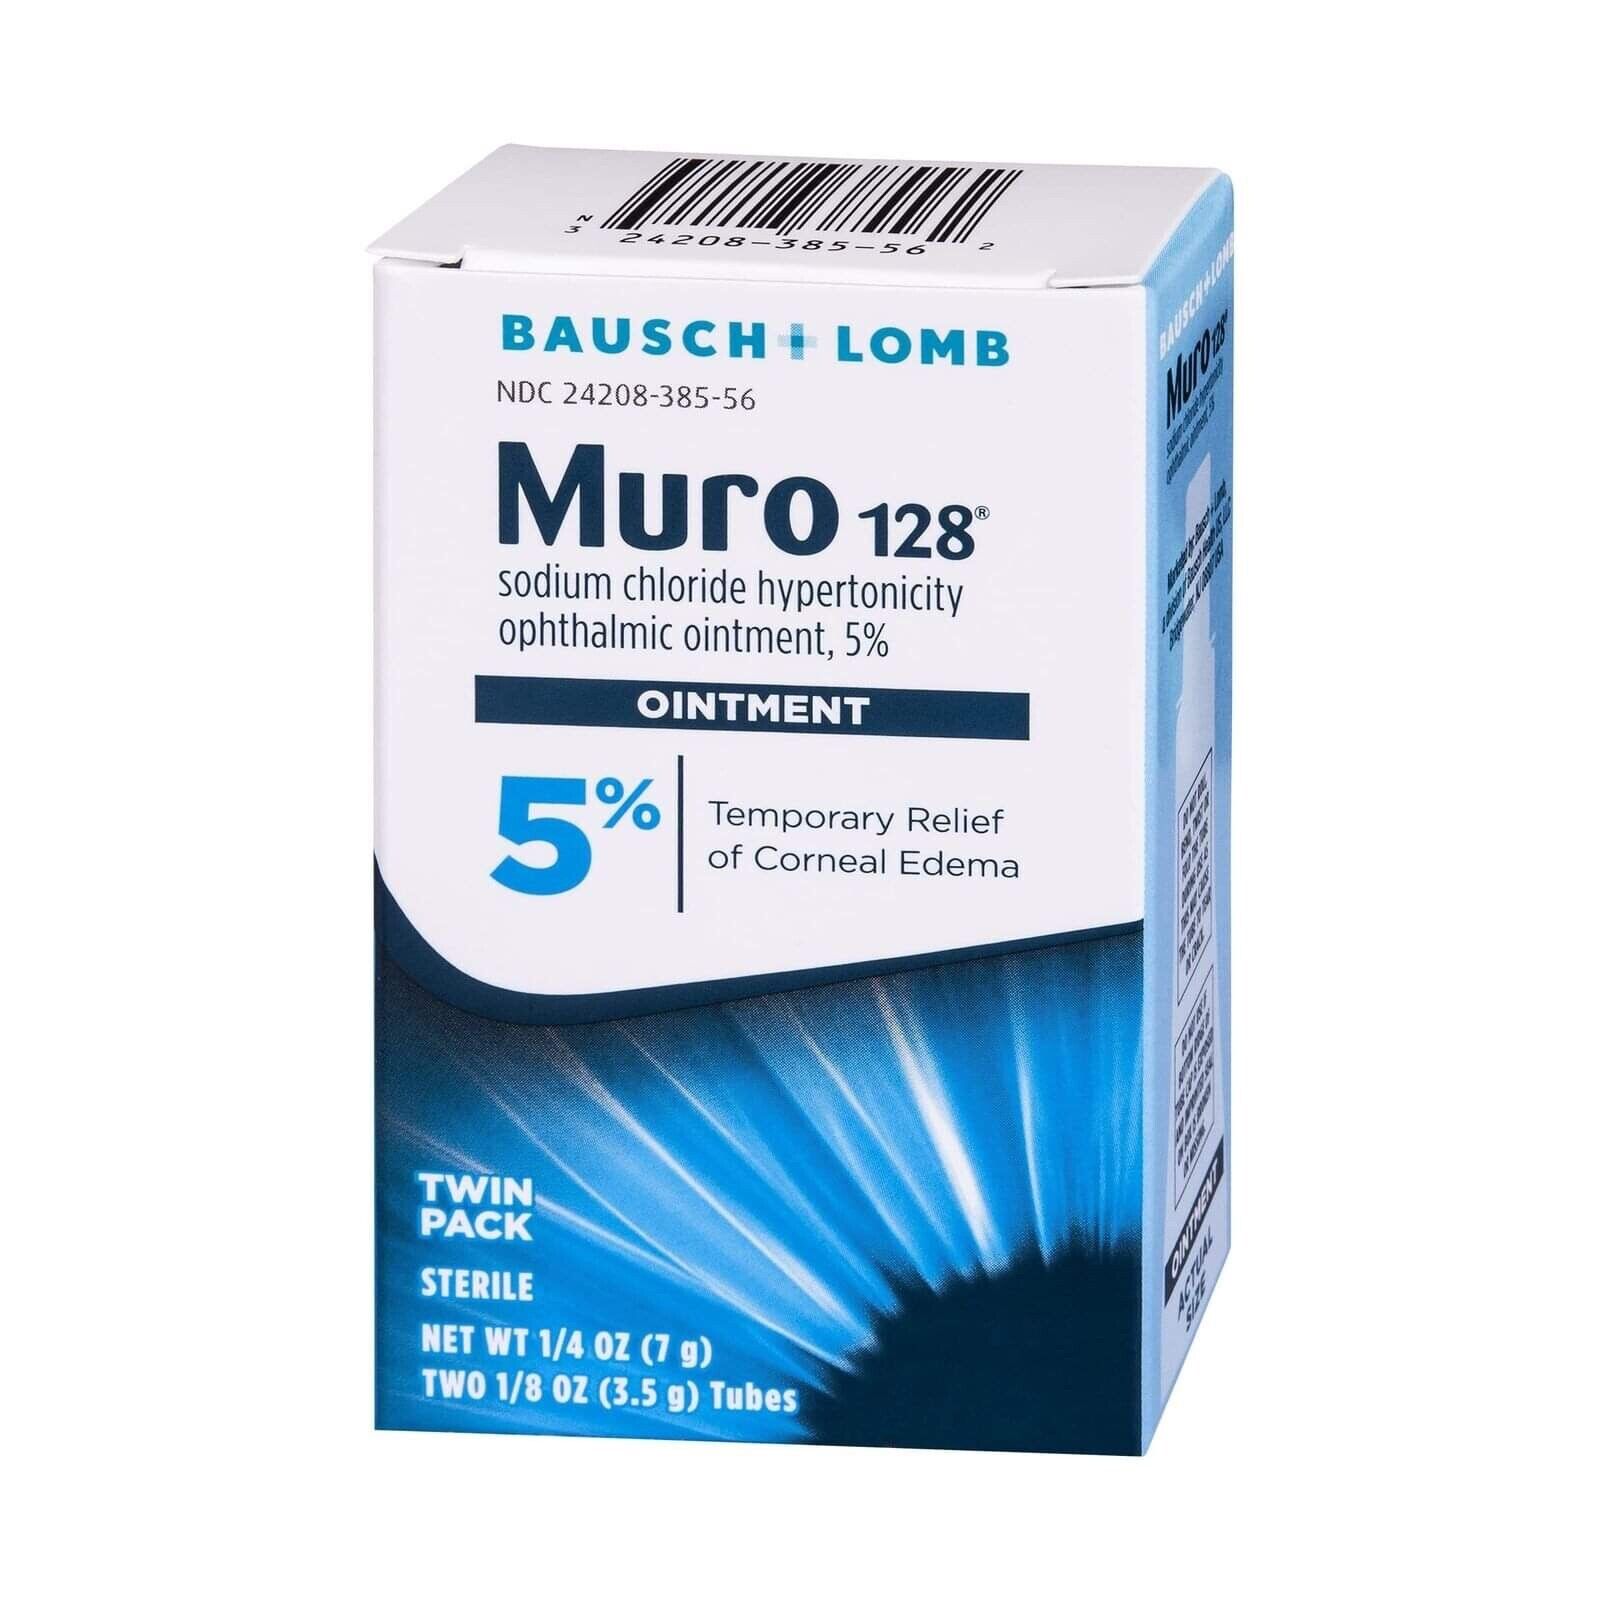 Bausch + Lomb Muro 128 Hypertonicity Ophthalmic Ointment Twin Pack 0.25 Oz 3/26